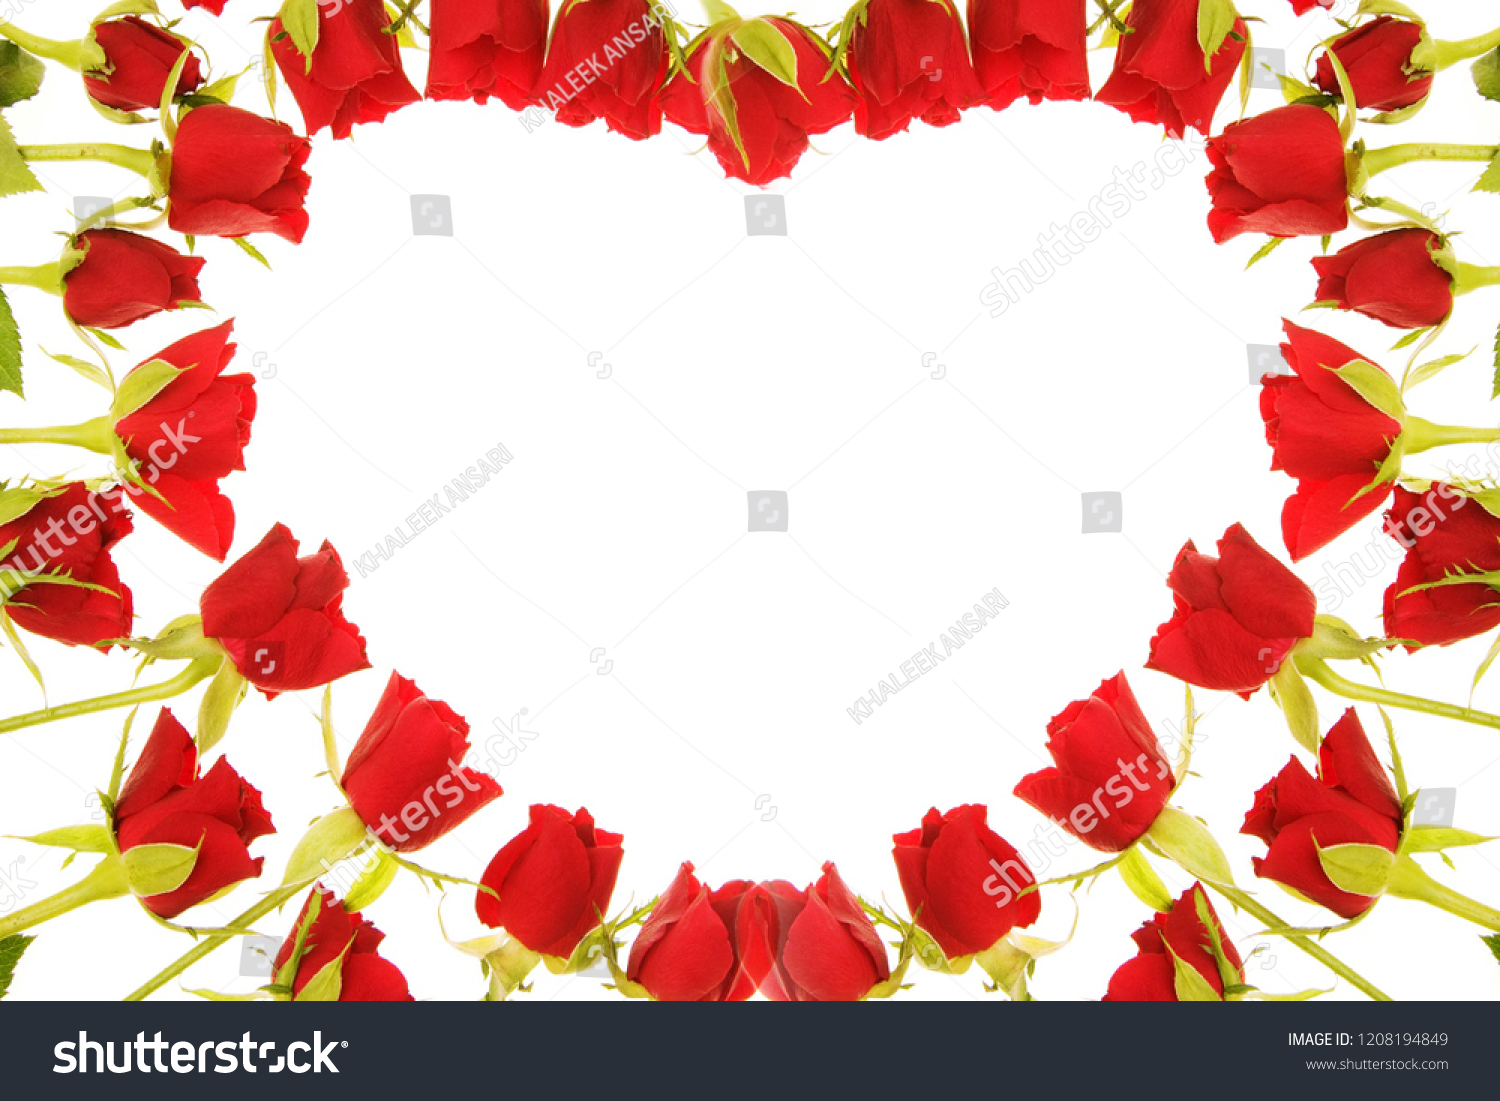 Red Rose Beautiful Rose Flower Wallpaper Stock Photo Edit Now 1208194849,How To Decorate Your Room On A Low Budget